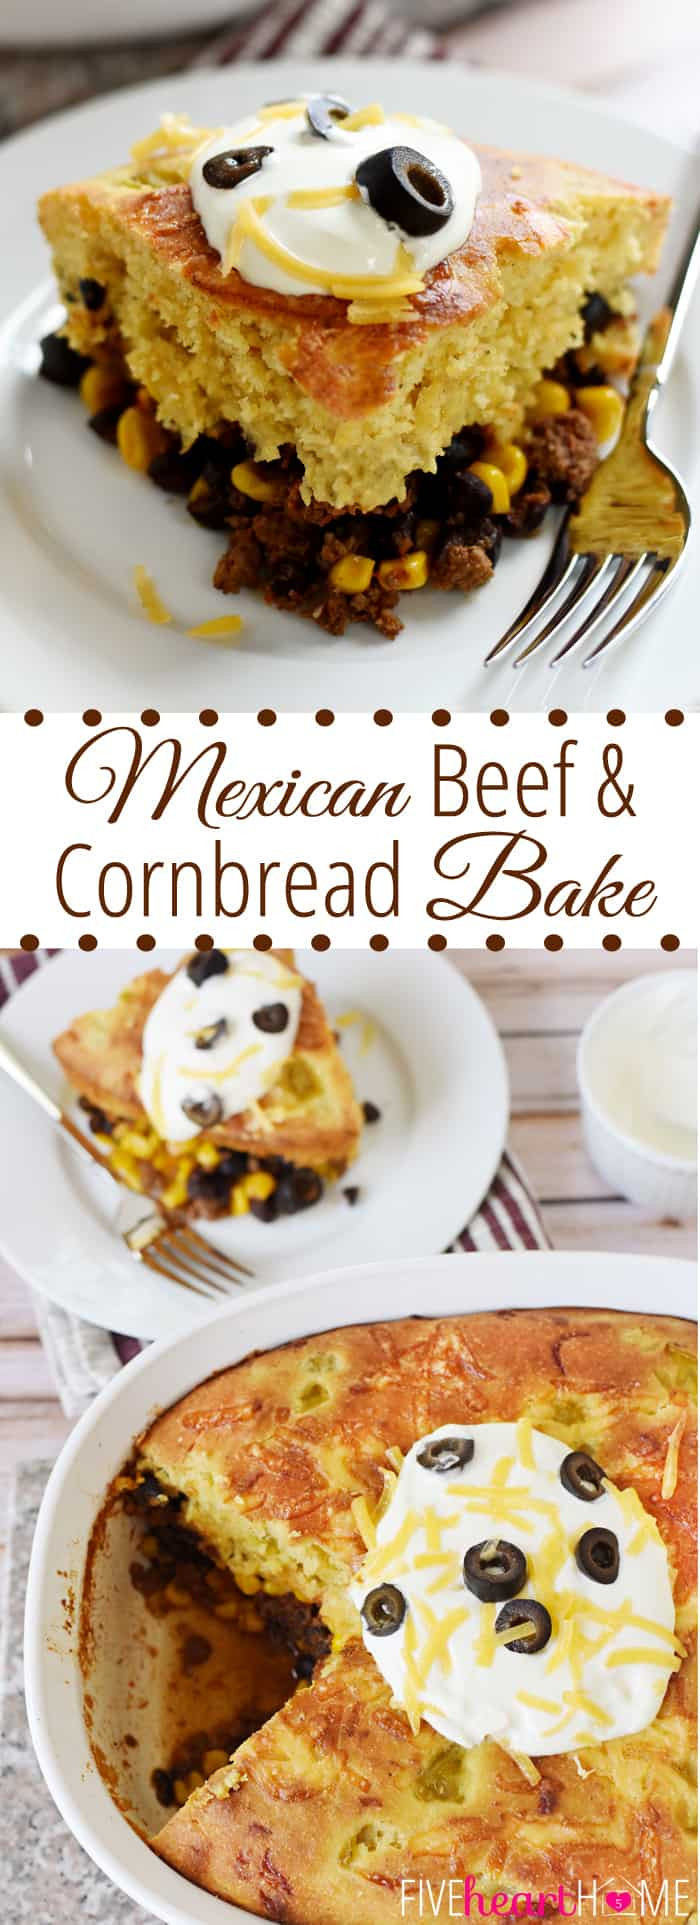 Ground Beef And Cornbread Recipes
 Mexican Beef & Cornbread Bake • FIVEheartHOME